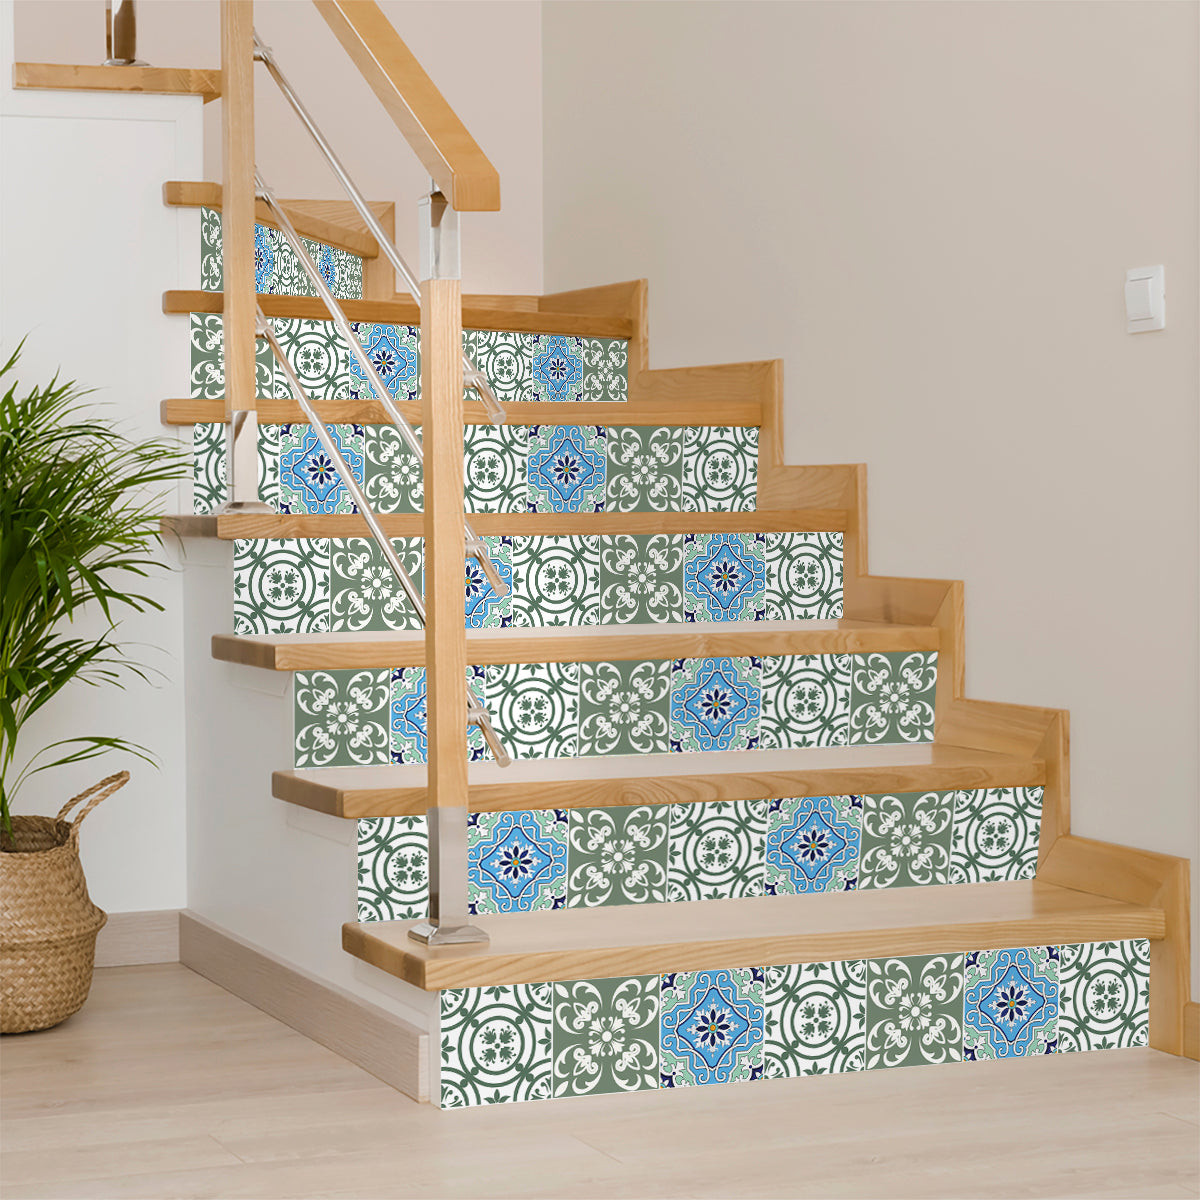 4" X 4" Sage And Aqua Floral Peel And Stick Removable Tiles-390883-1